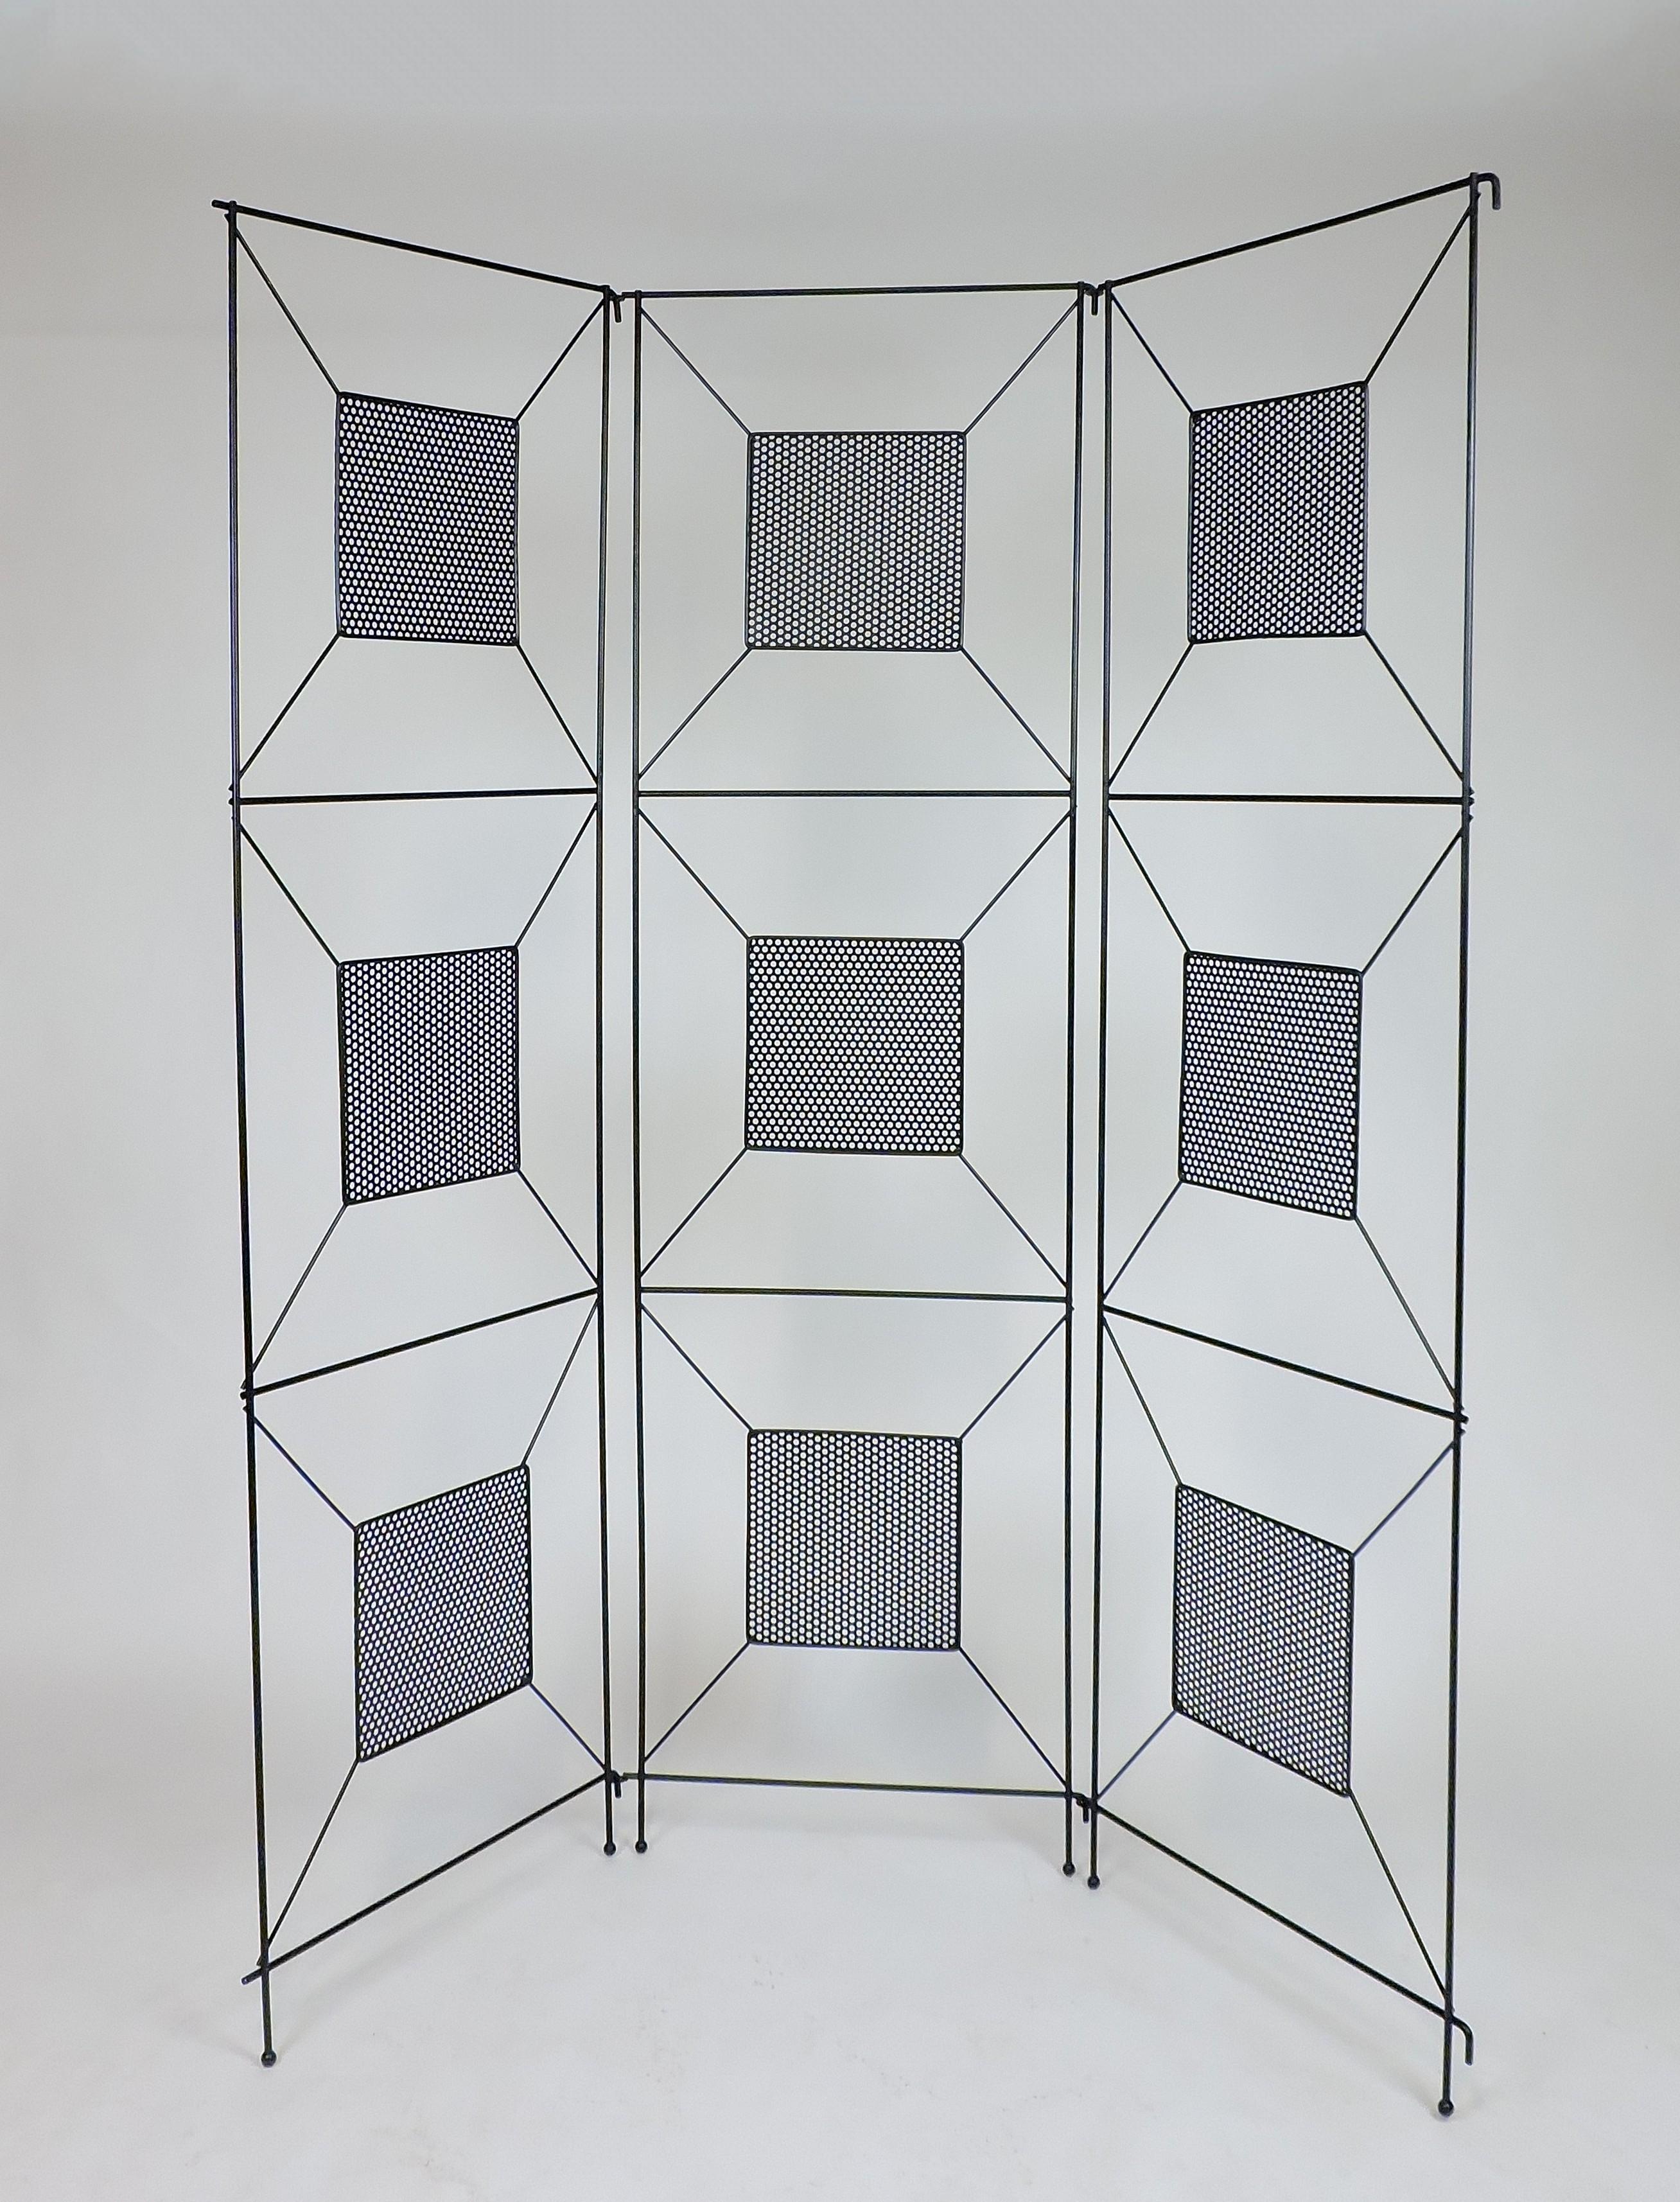 Mid-Century Modern three-piece room divider attributed to Frederick Weinberg. This screen has an iron frame with perforated center panels, and the original ball feet are all present. It has a great geometric modernist look. 
The panels come apart